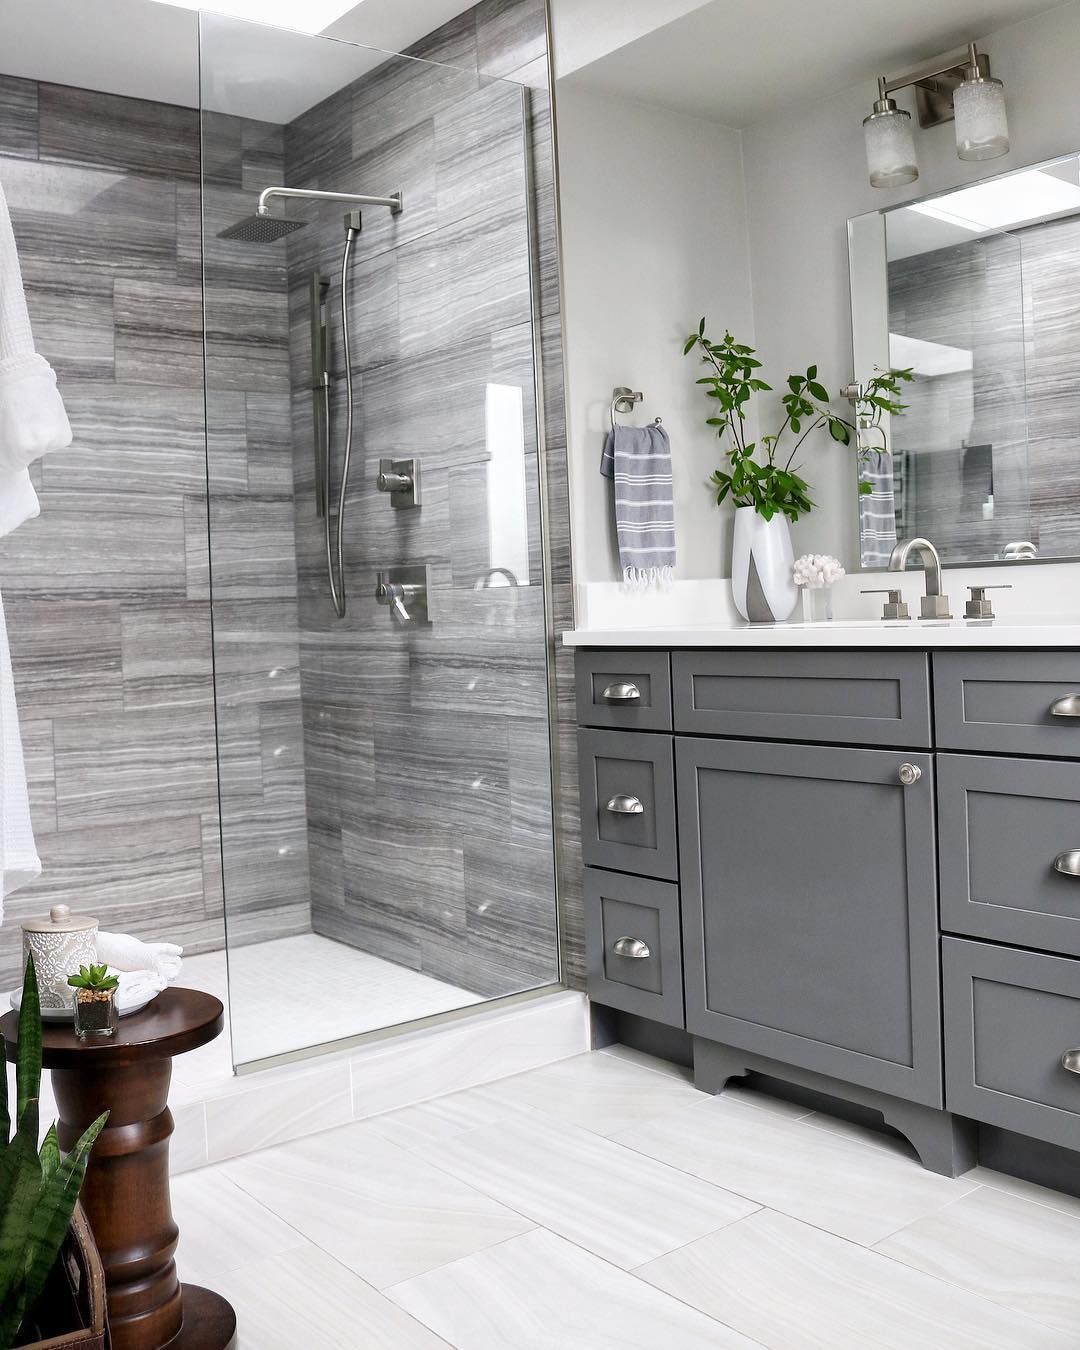 Julie Nay on Instagram: “I heard that if you hang eucalyptus in your shower, that the steam will activate the essential oils helping with congestion & making your…” -   12 room decor Purple master bath ideas